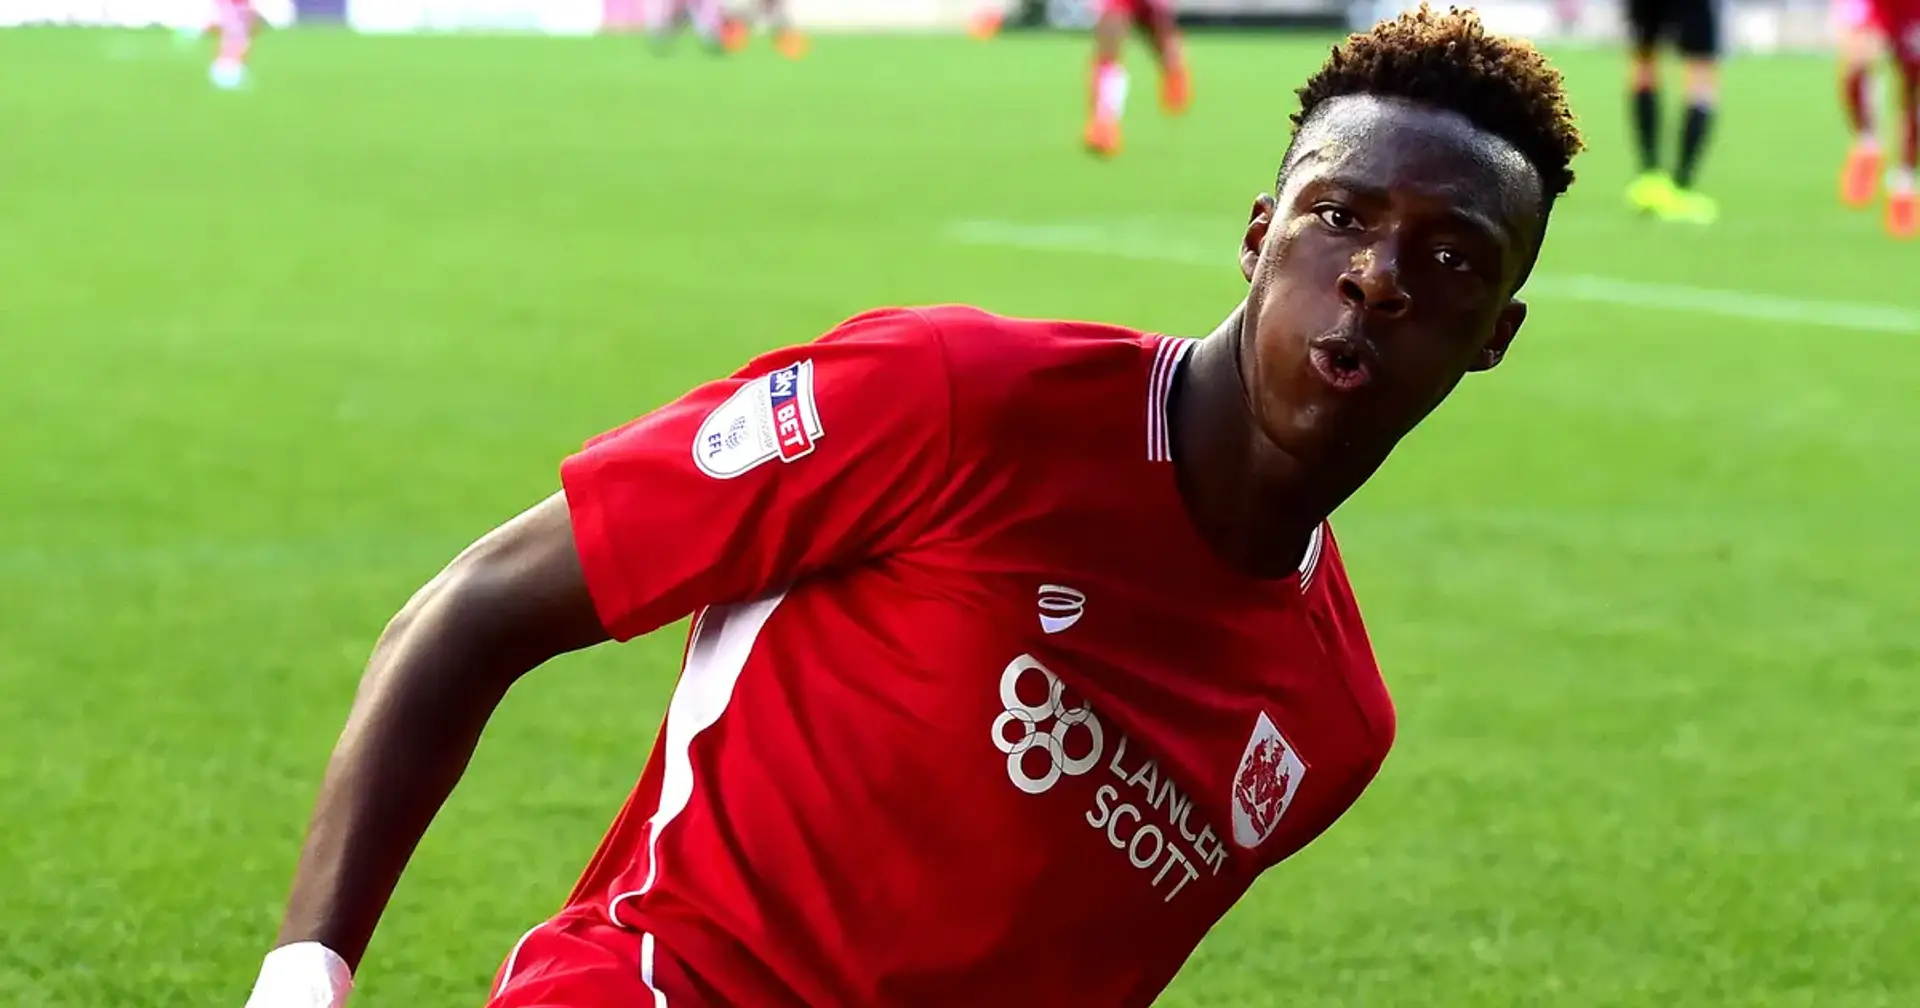 Everything is like 'Woah!': Tammy Abraham fondly recalls first loan spell at Bristol City